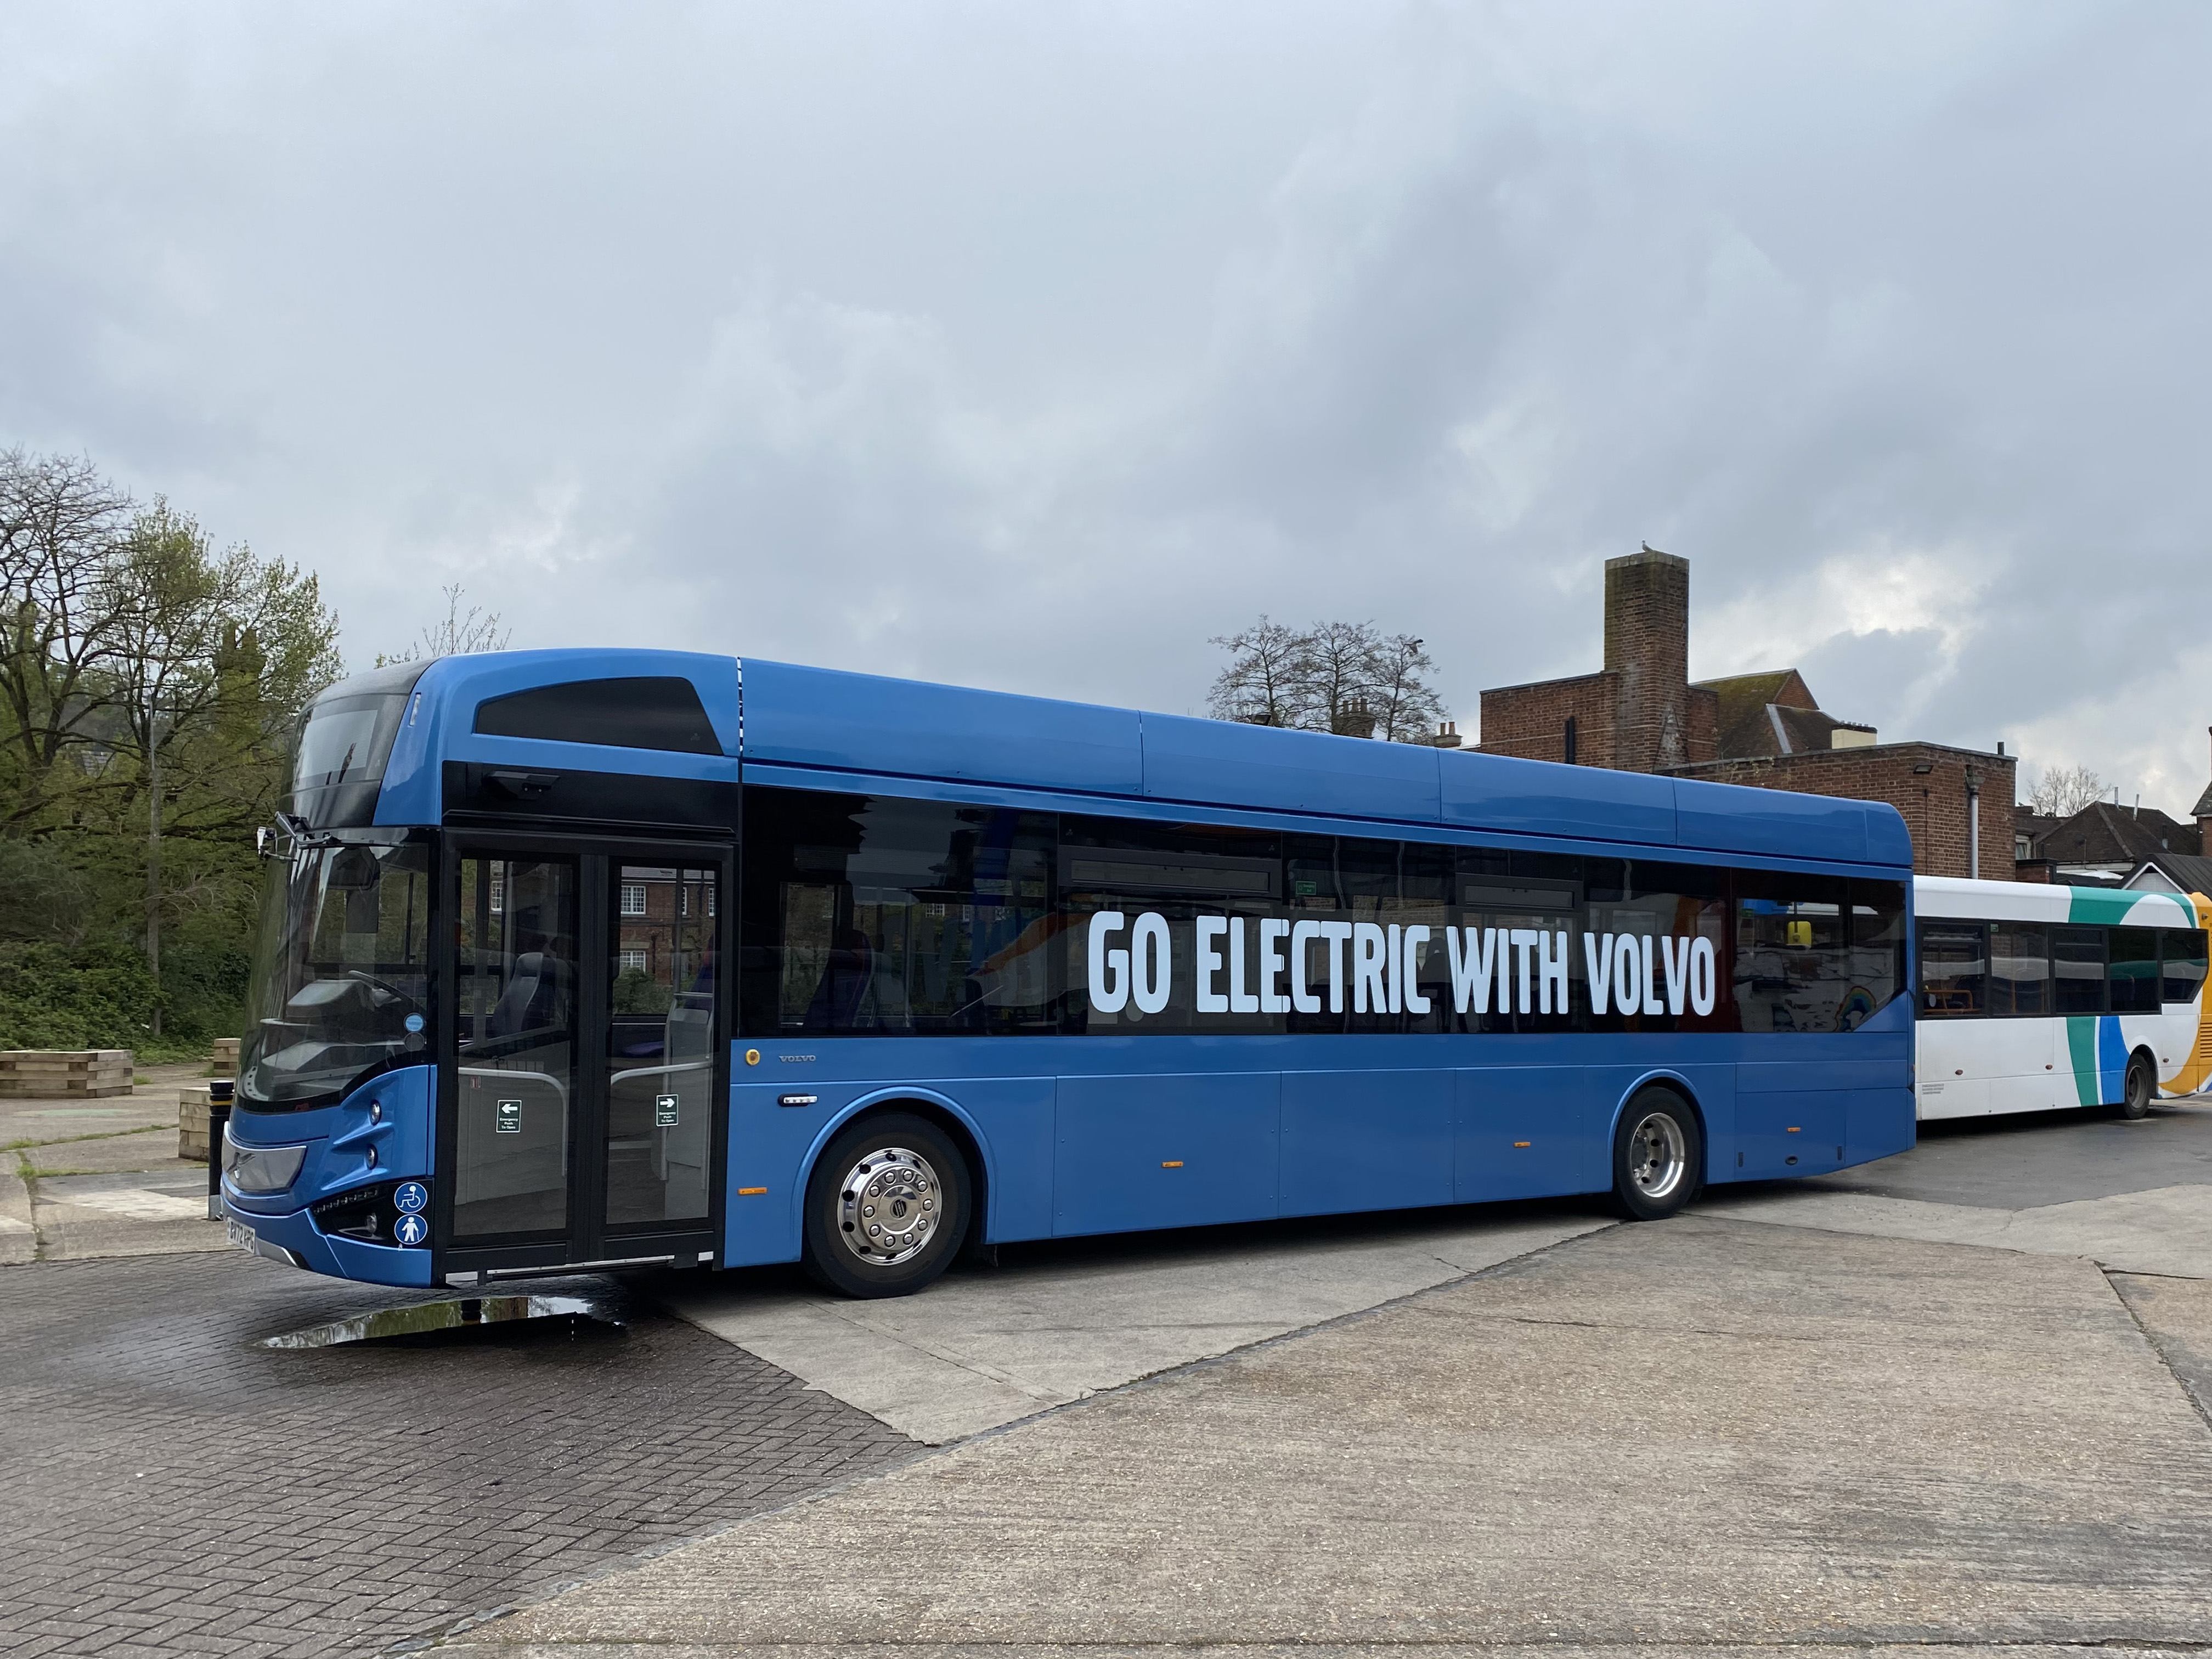 MP considers funding after electric Volvo trial